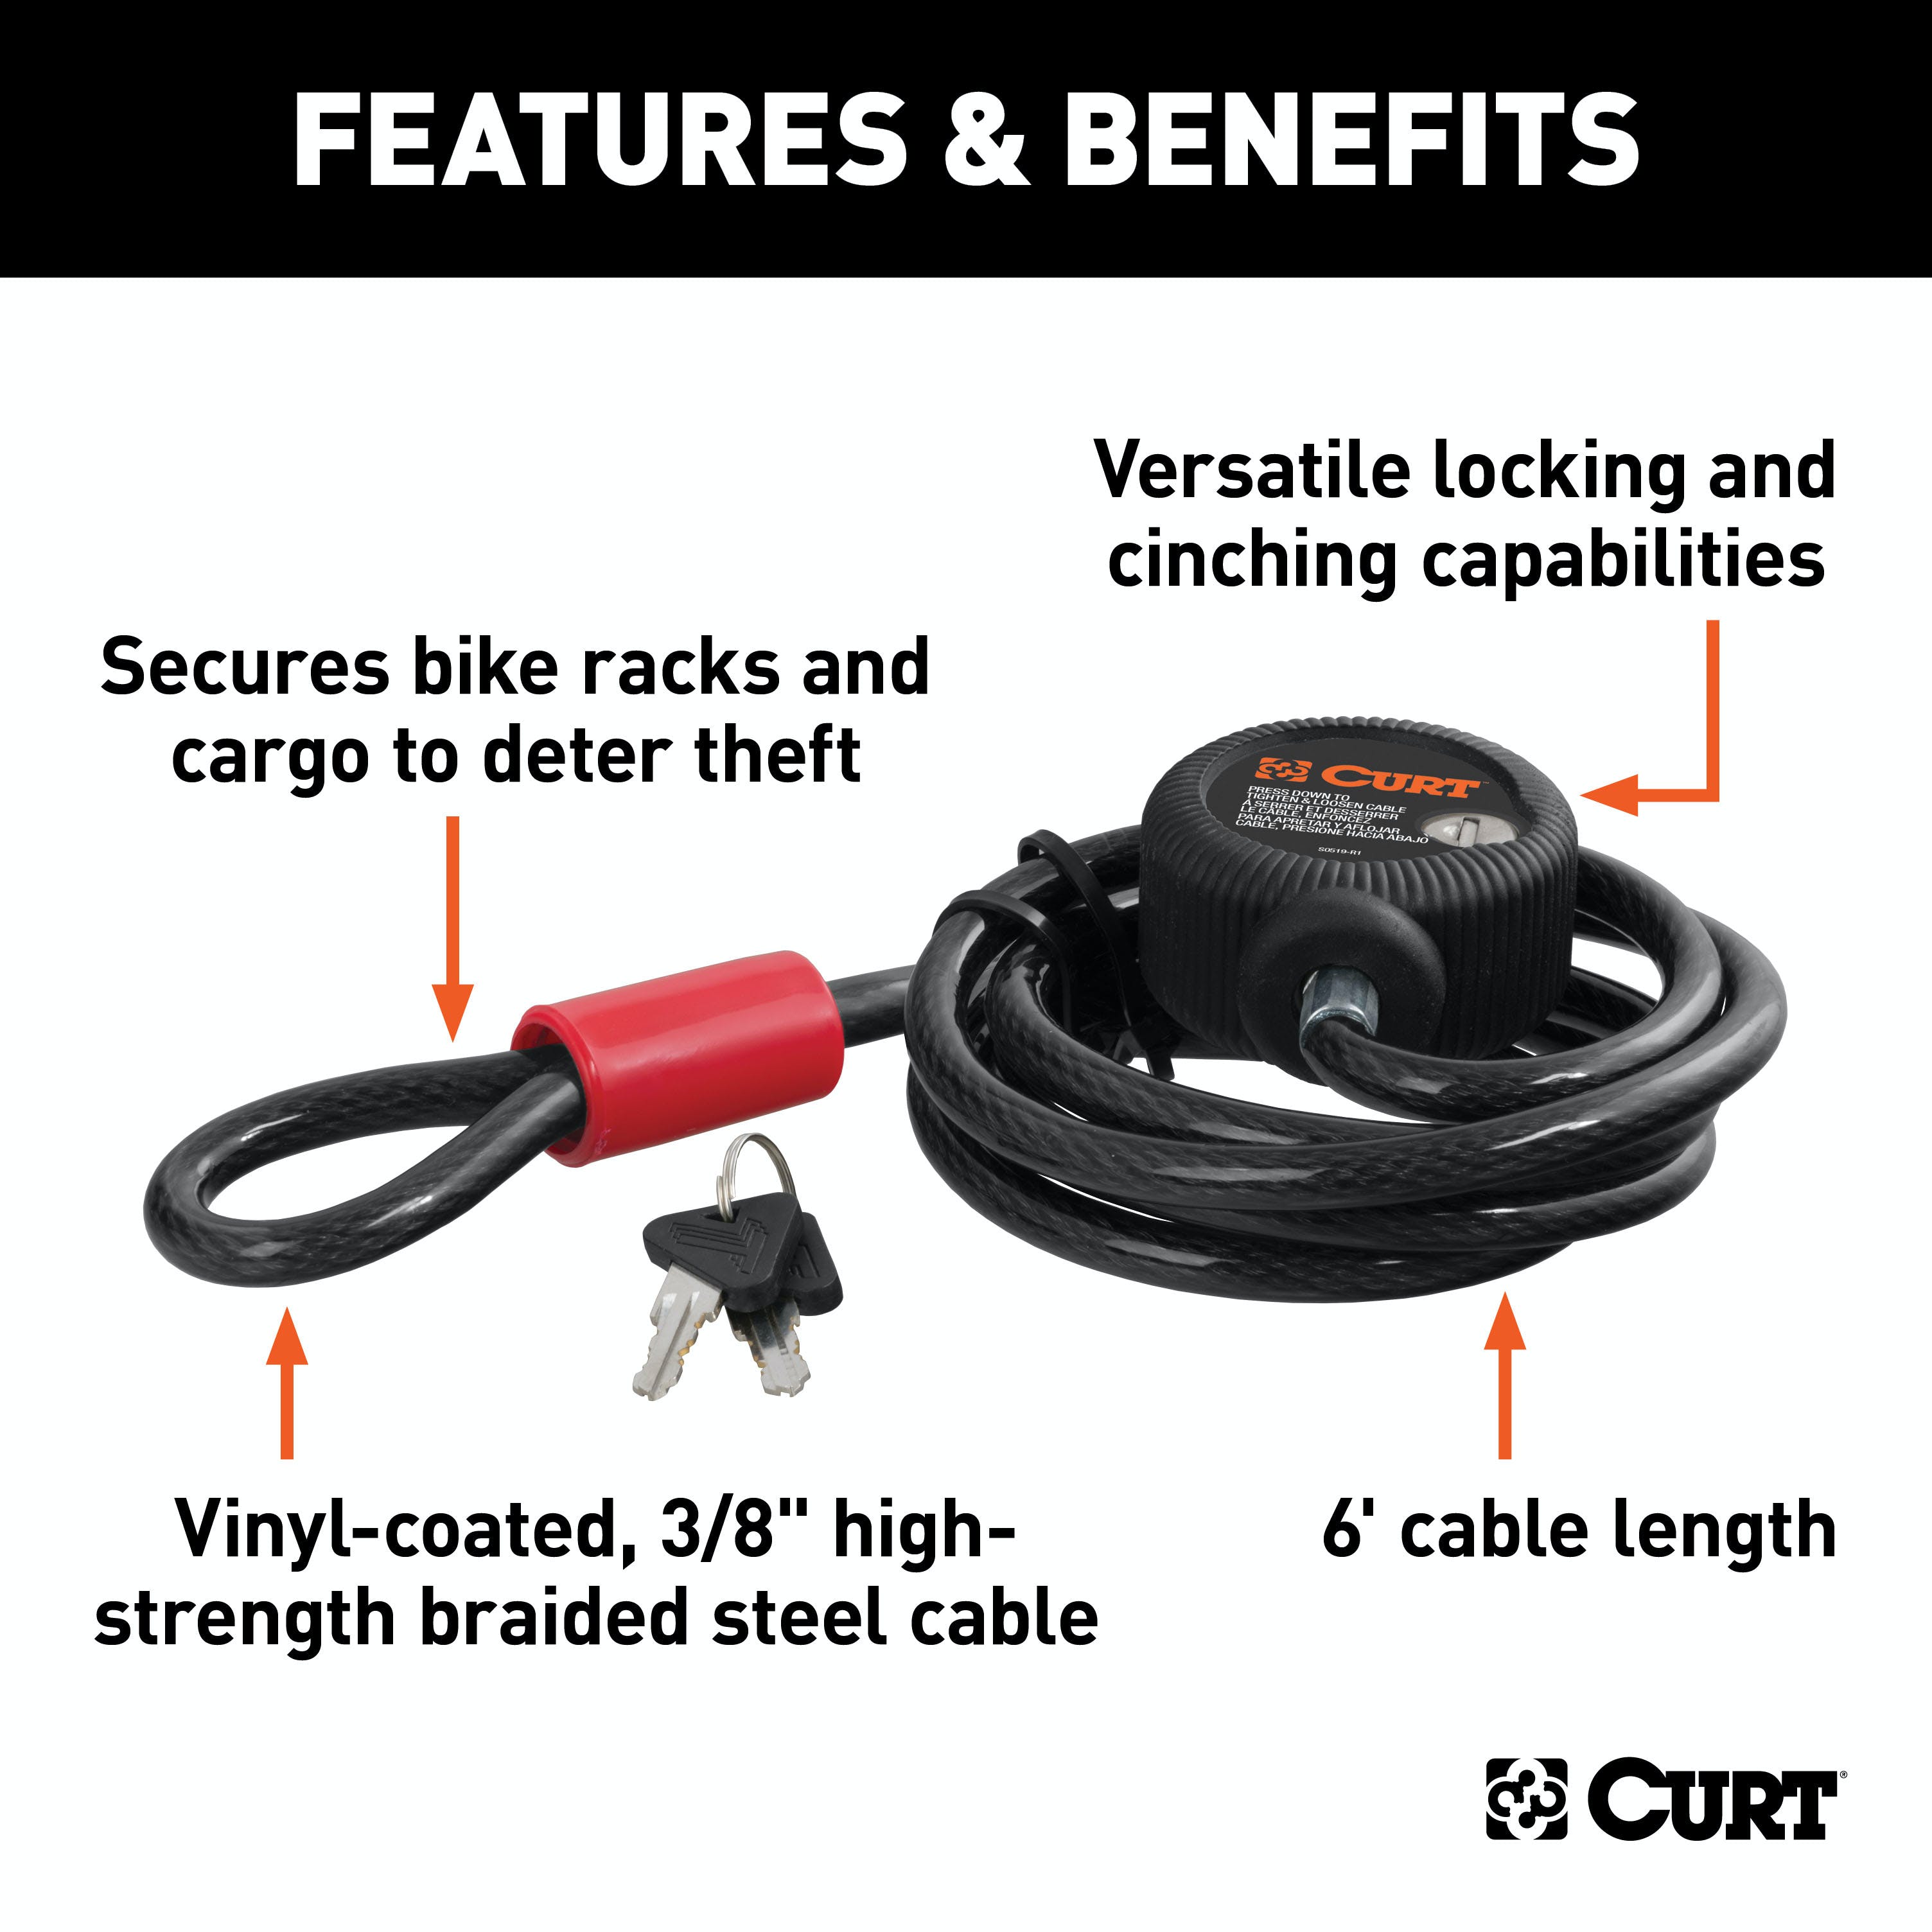 CURT 23666 Multi-Use Cable Lock (6' x 3/8 Cable, Vinyl-Coated Braided Steel)